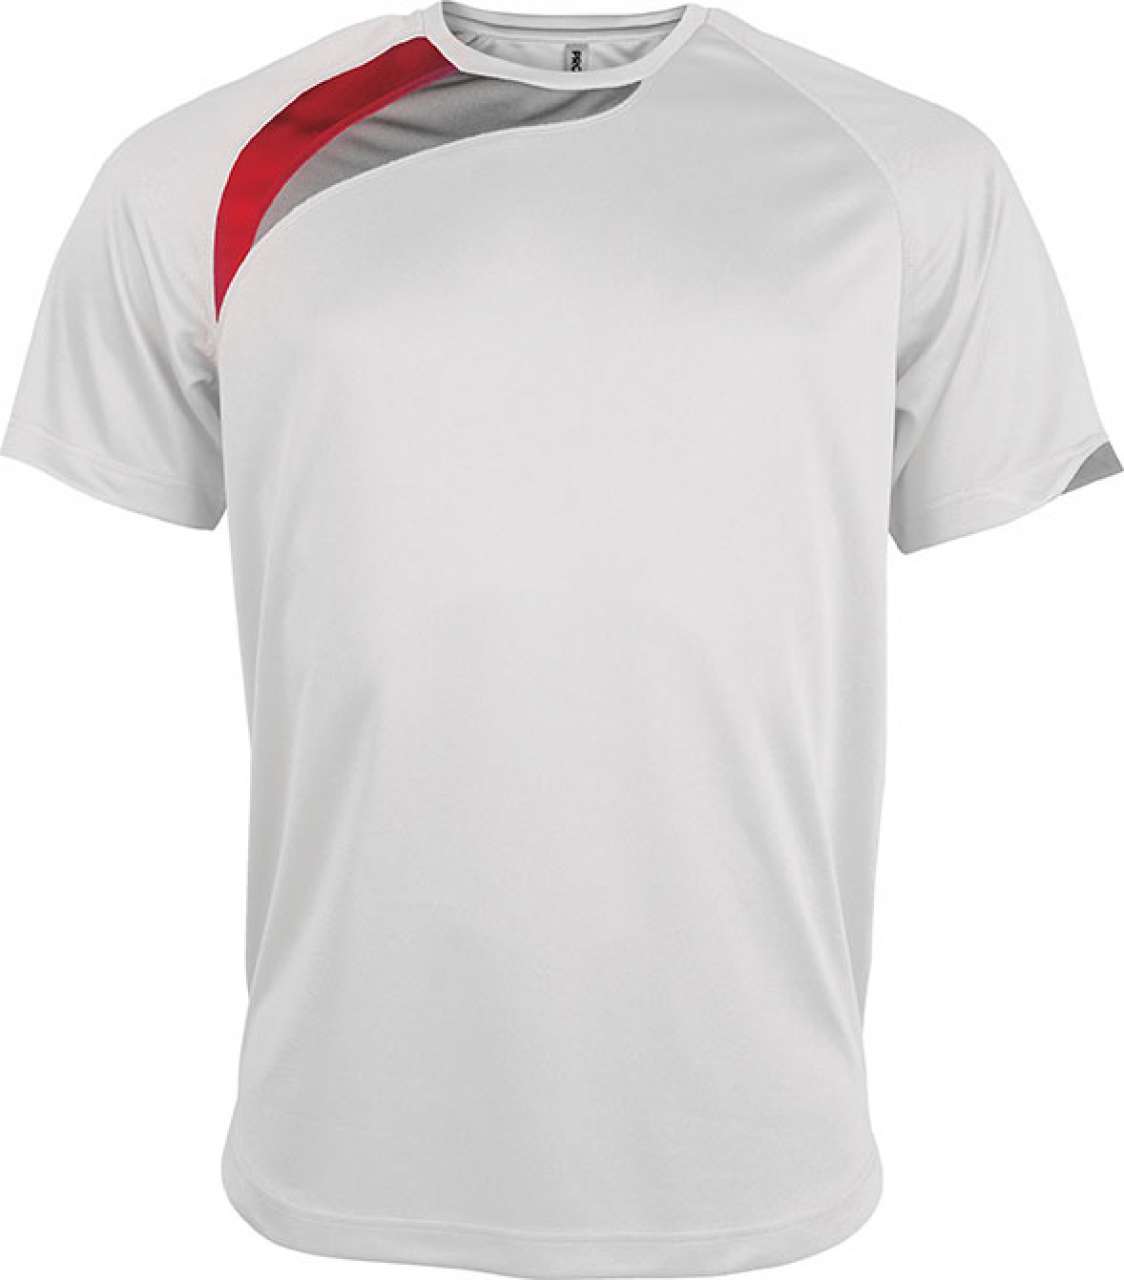 Promo  ADULTS SHORT-SLEEVED JERSEY